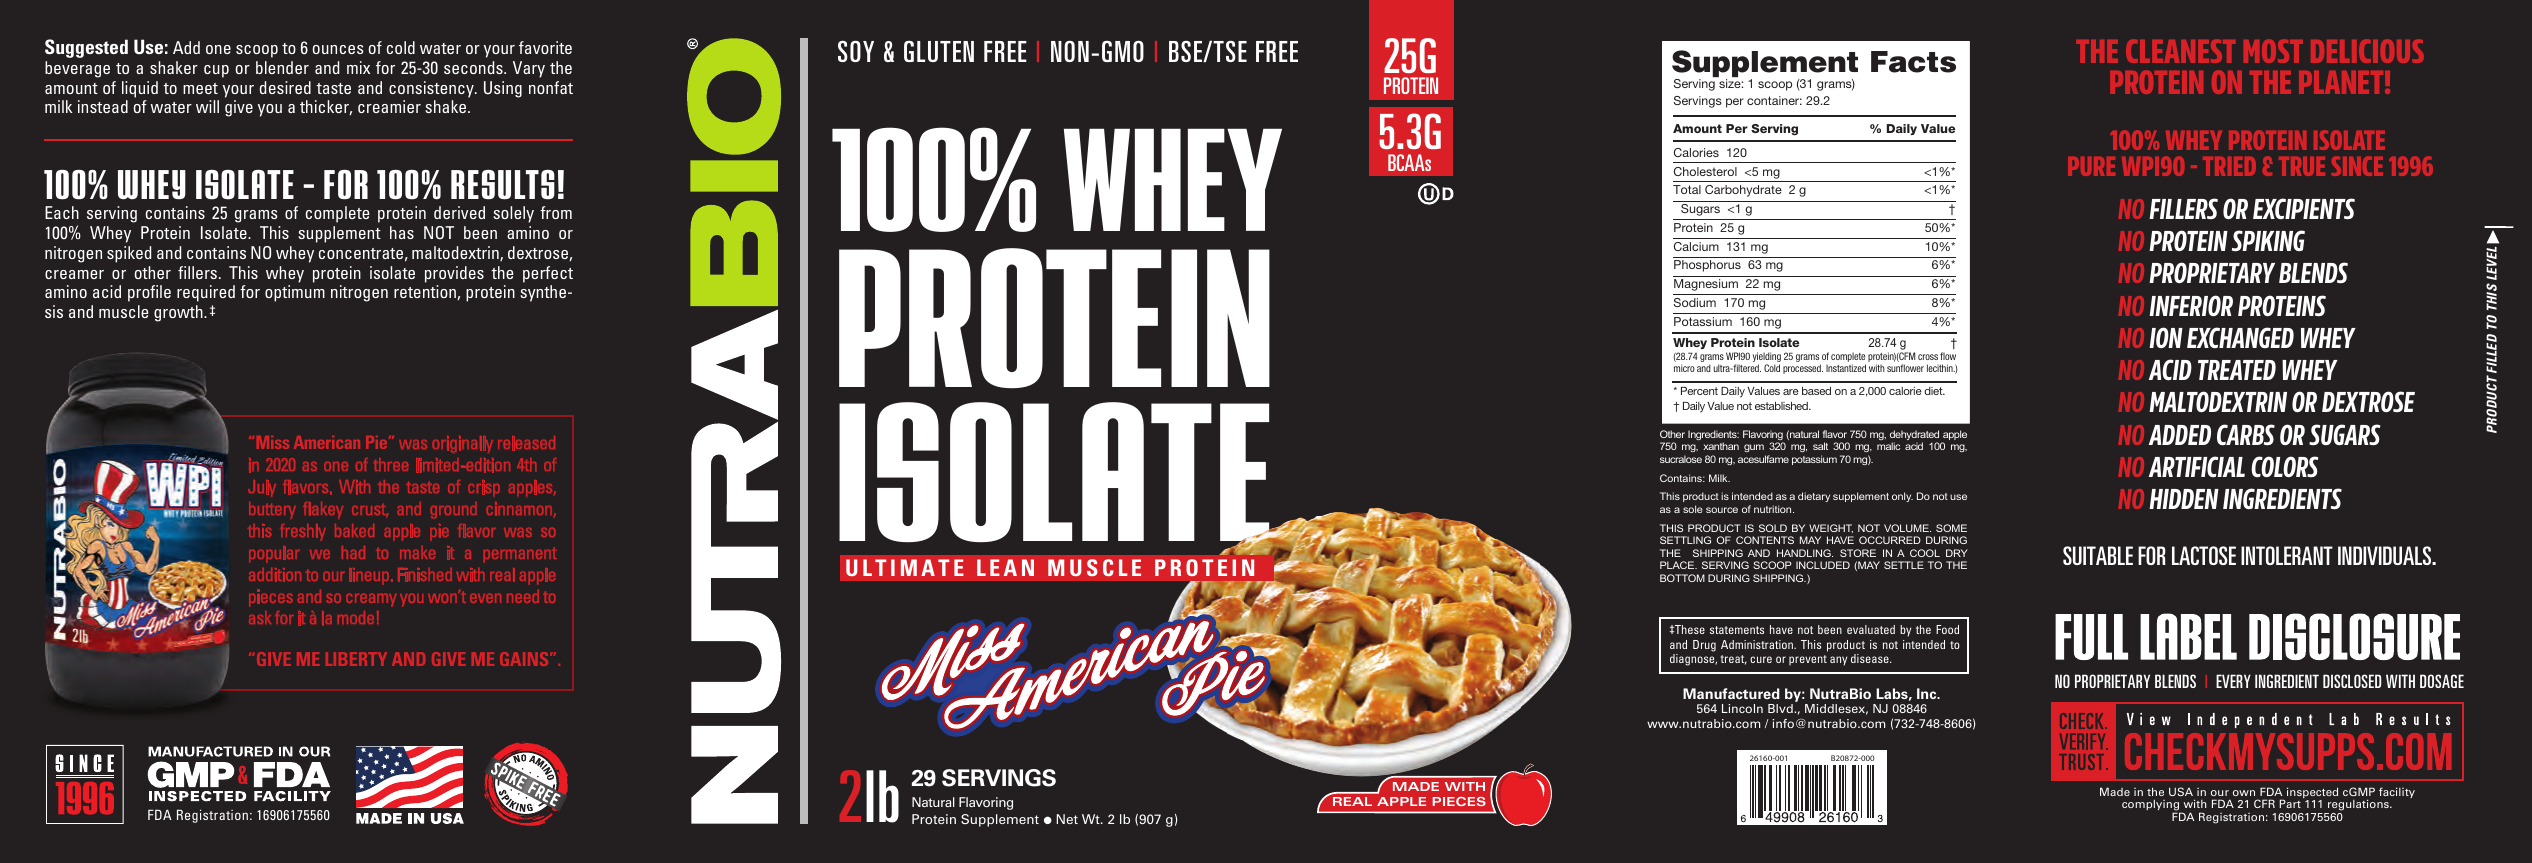 NutraBio 100% Whey Protein Isolate Miss American Pie Label